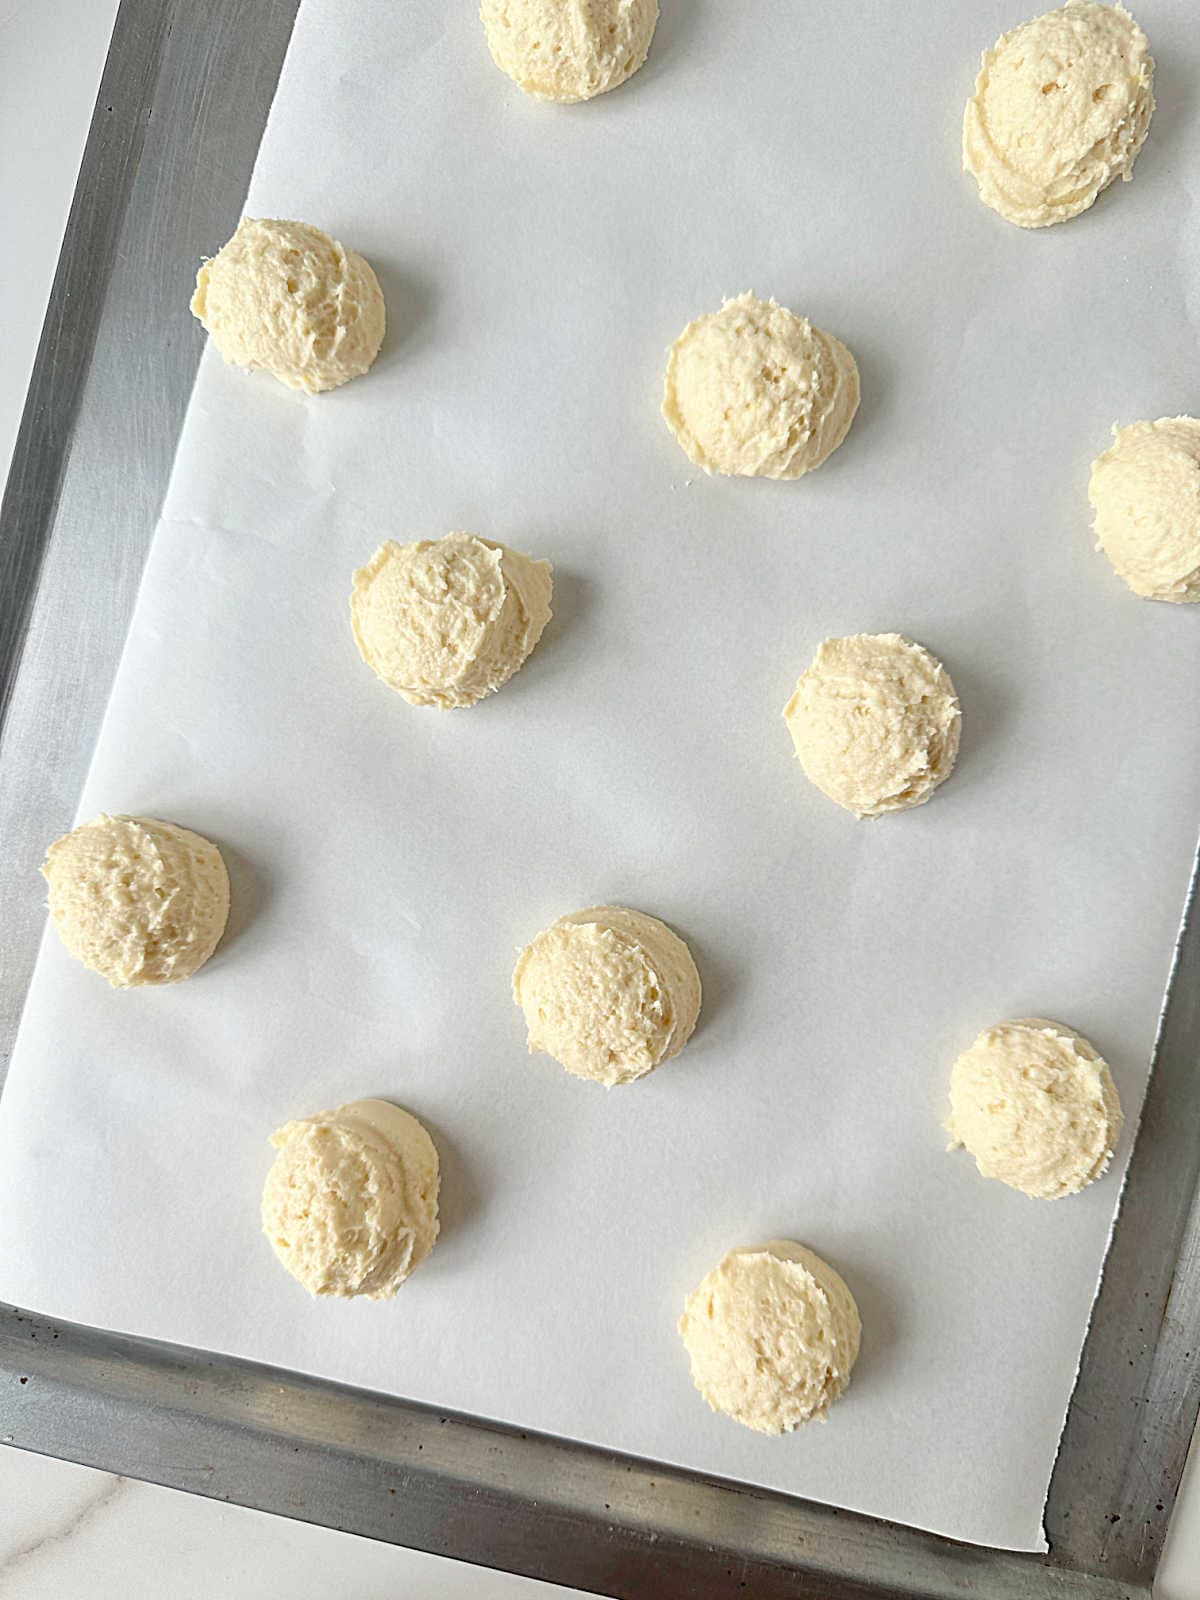 White parchment paper with ricotta cookies before baking on a metal tray.